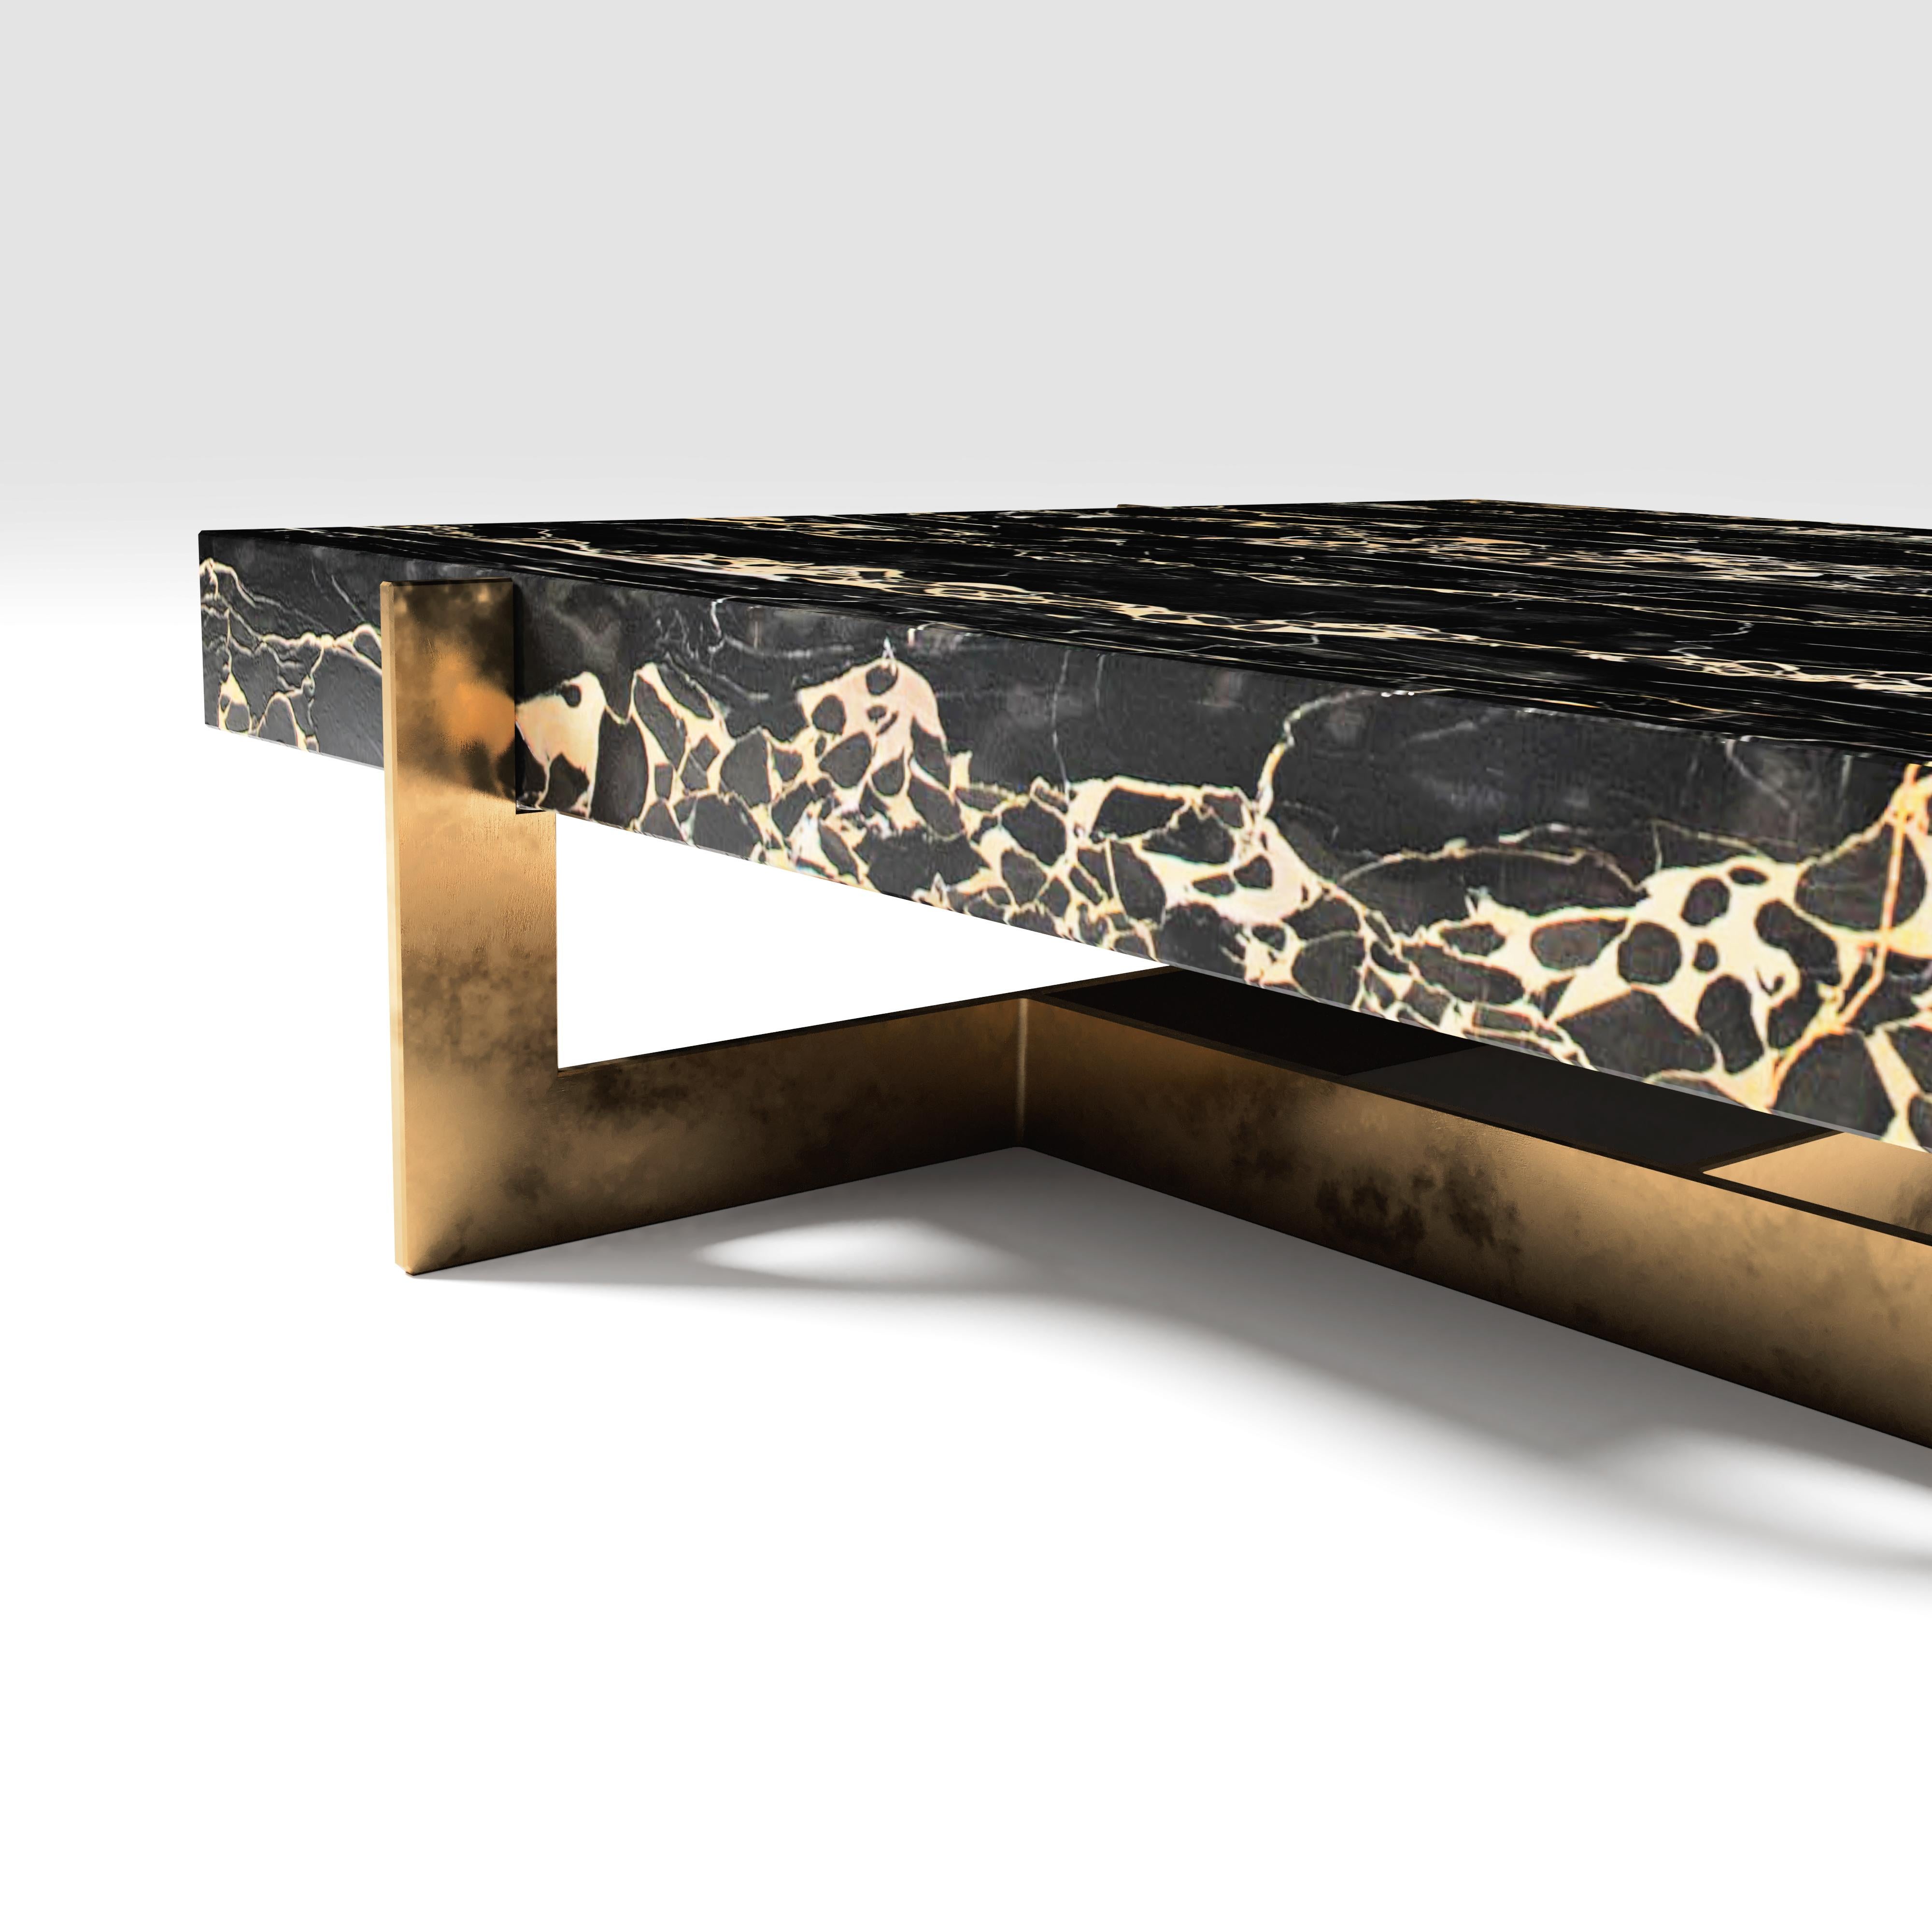 British The Golden Rock II Coffee Table, Limited Edition by Grzegorz Majka